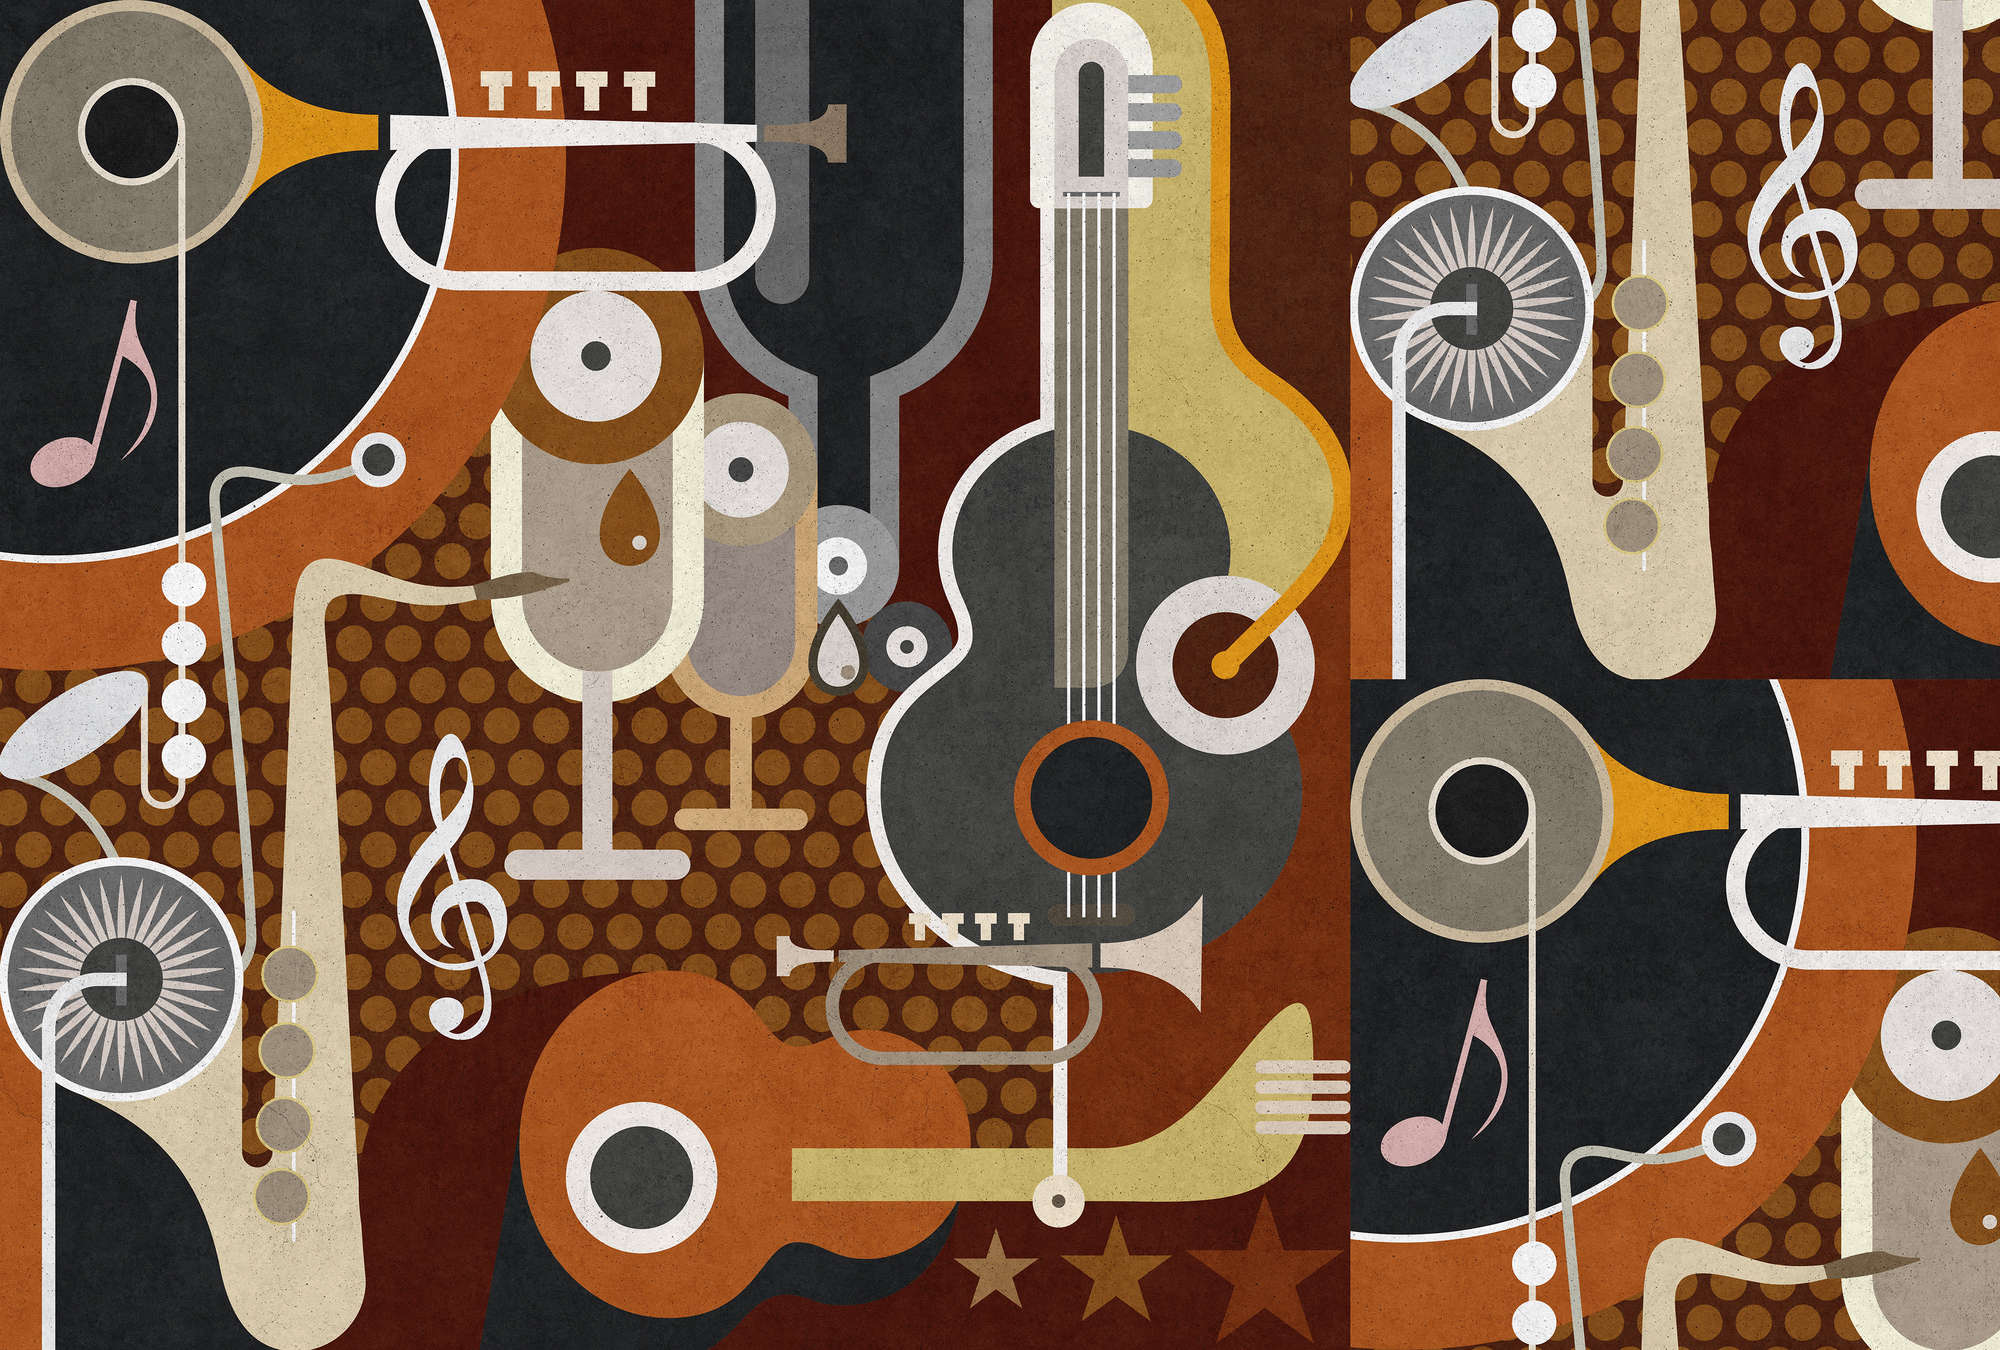             Wall of sound 1 - Wallpaper in concrete structure, abstract musical instruments - Beige, Brown | Structure non-woven
        